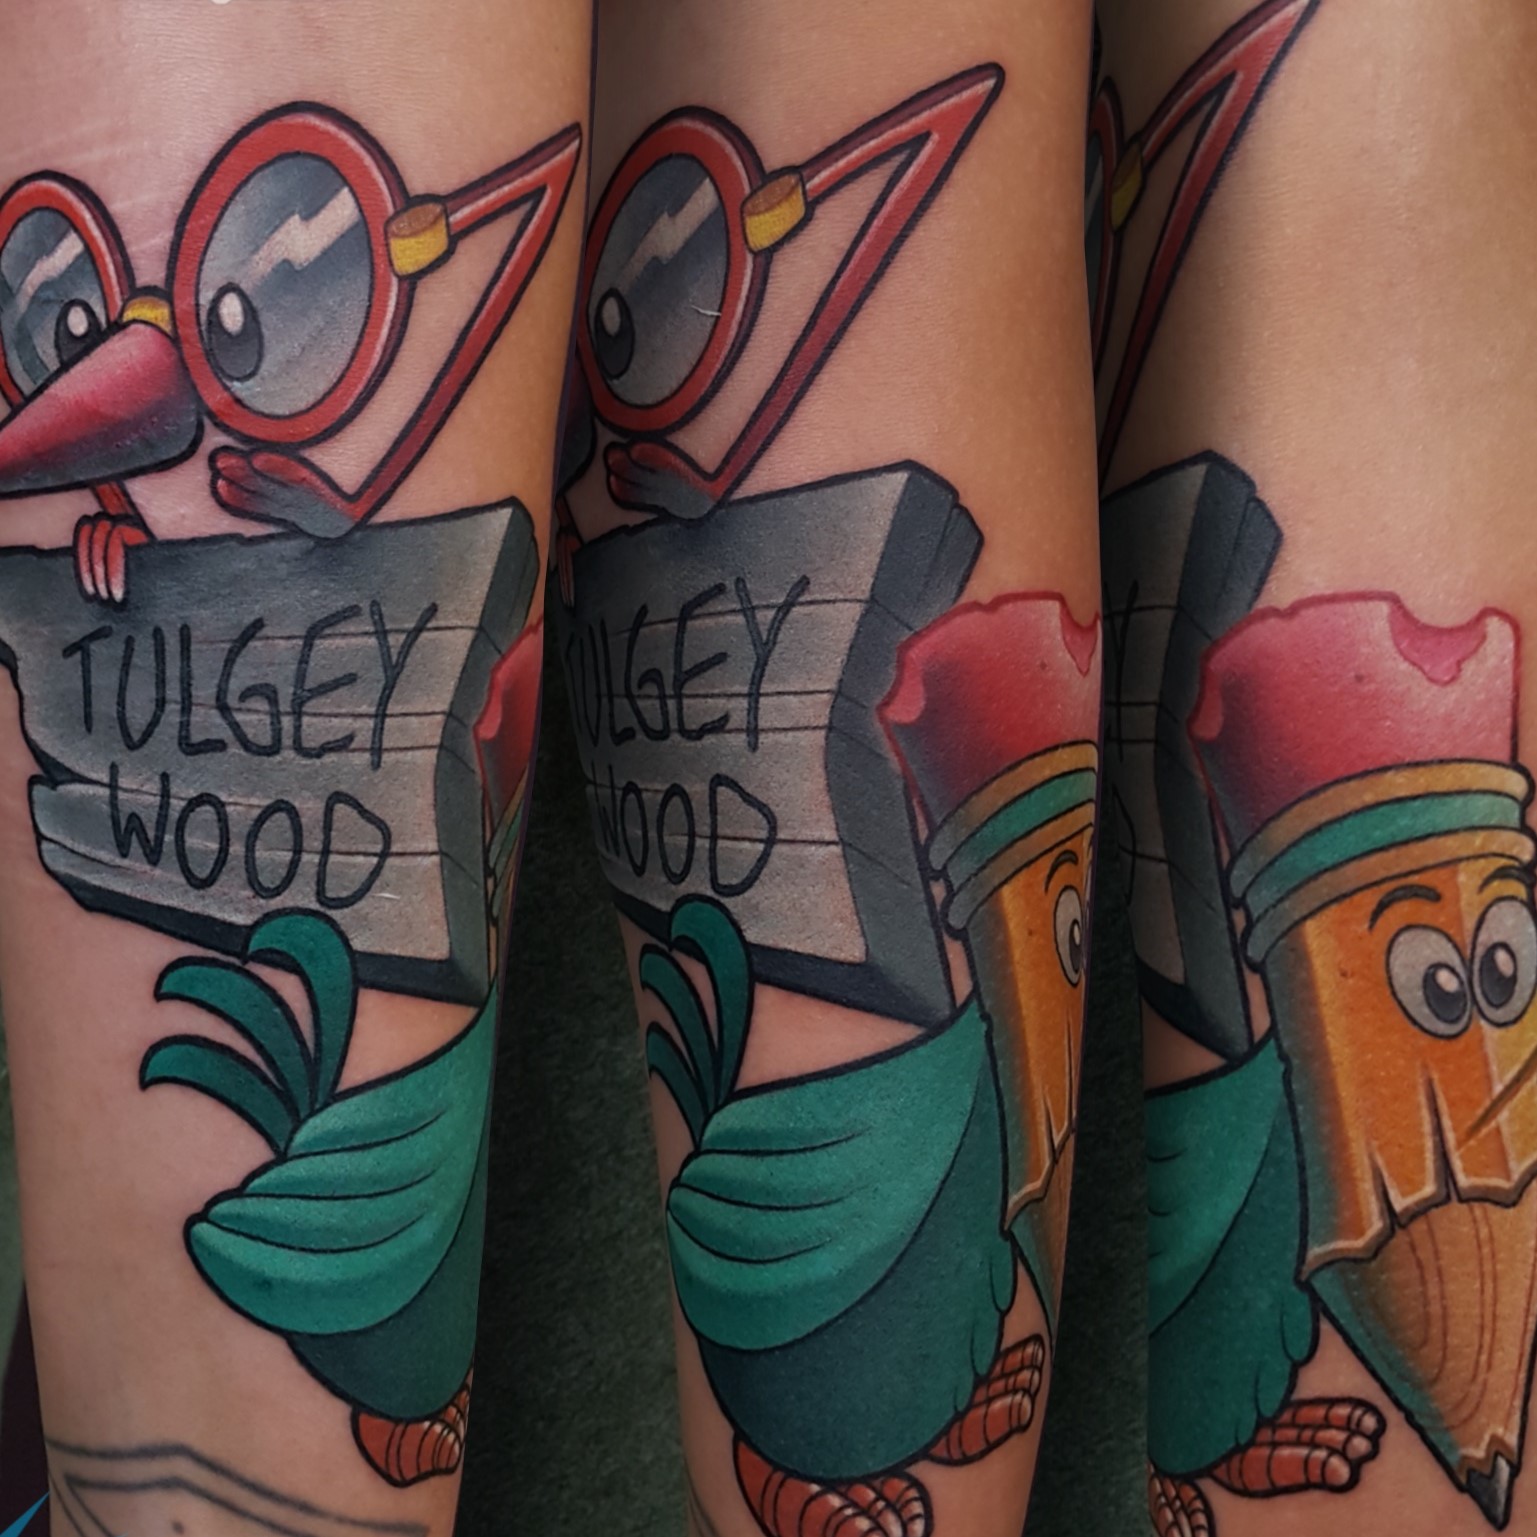 Tattoo of Tulgey Wood from Alice in Wonderland created by Cracker Joe Swider in CT